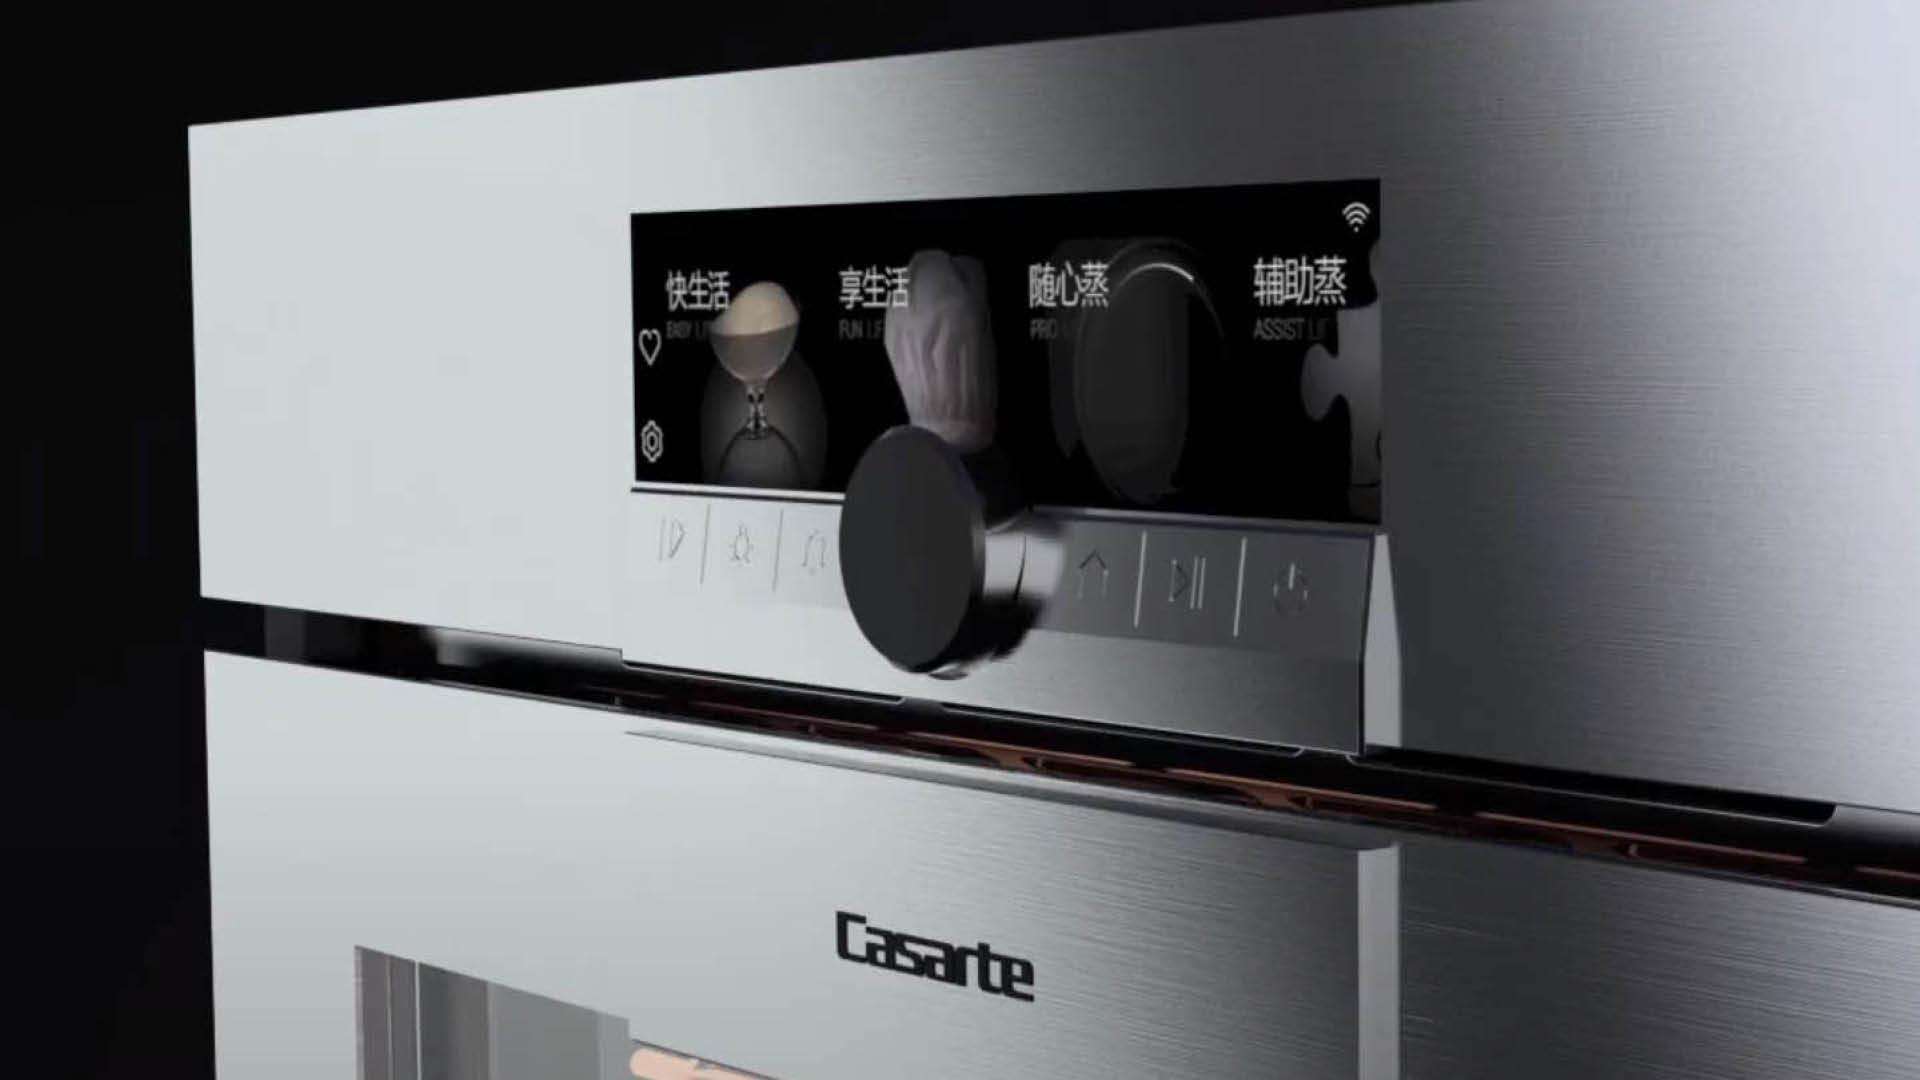 Discover how SCHOTT® MetalLook adds the appearance of stainless steel to an oven